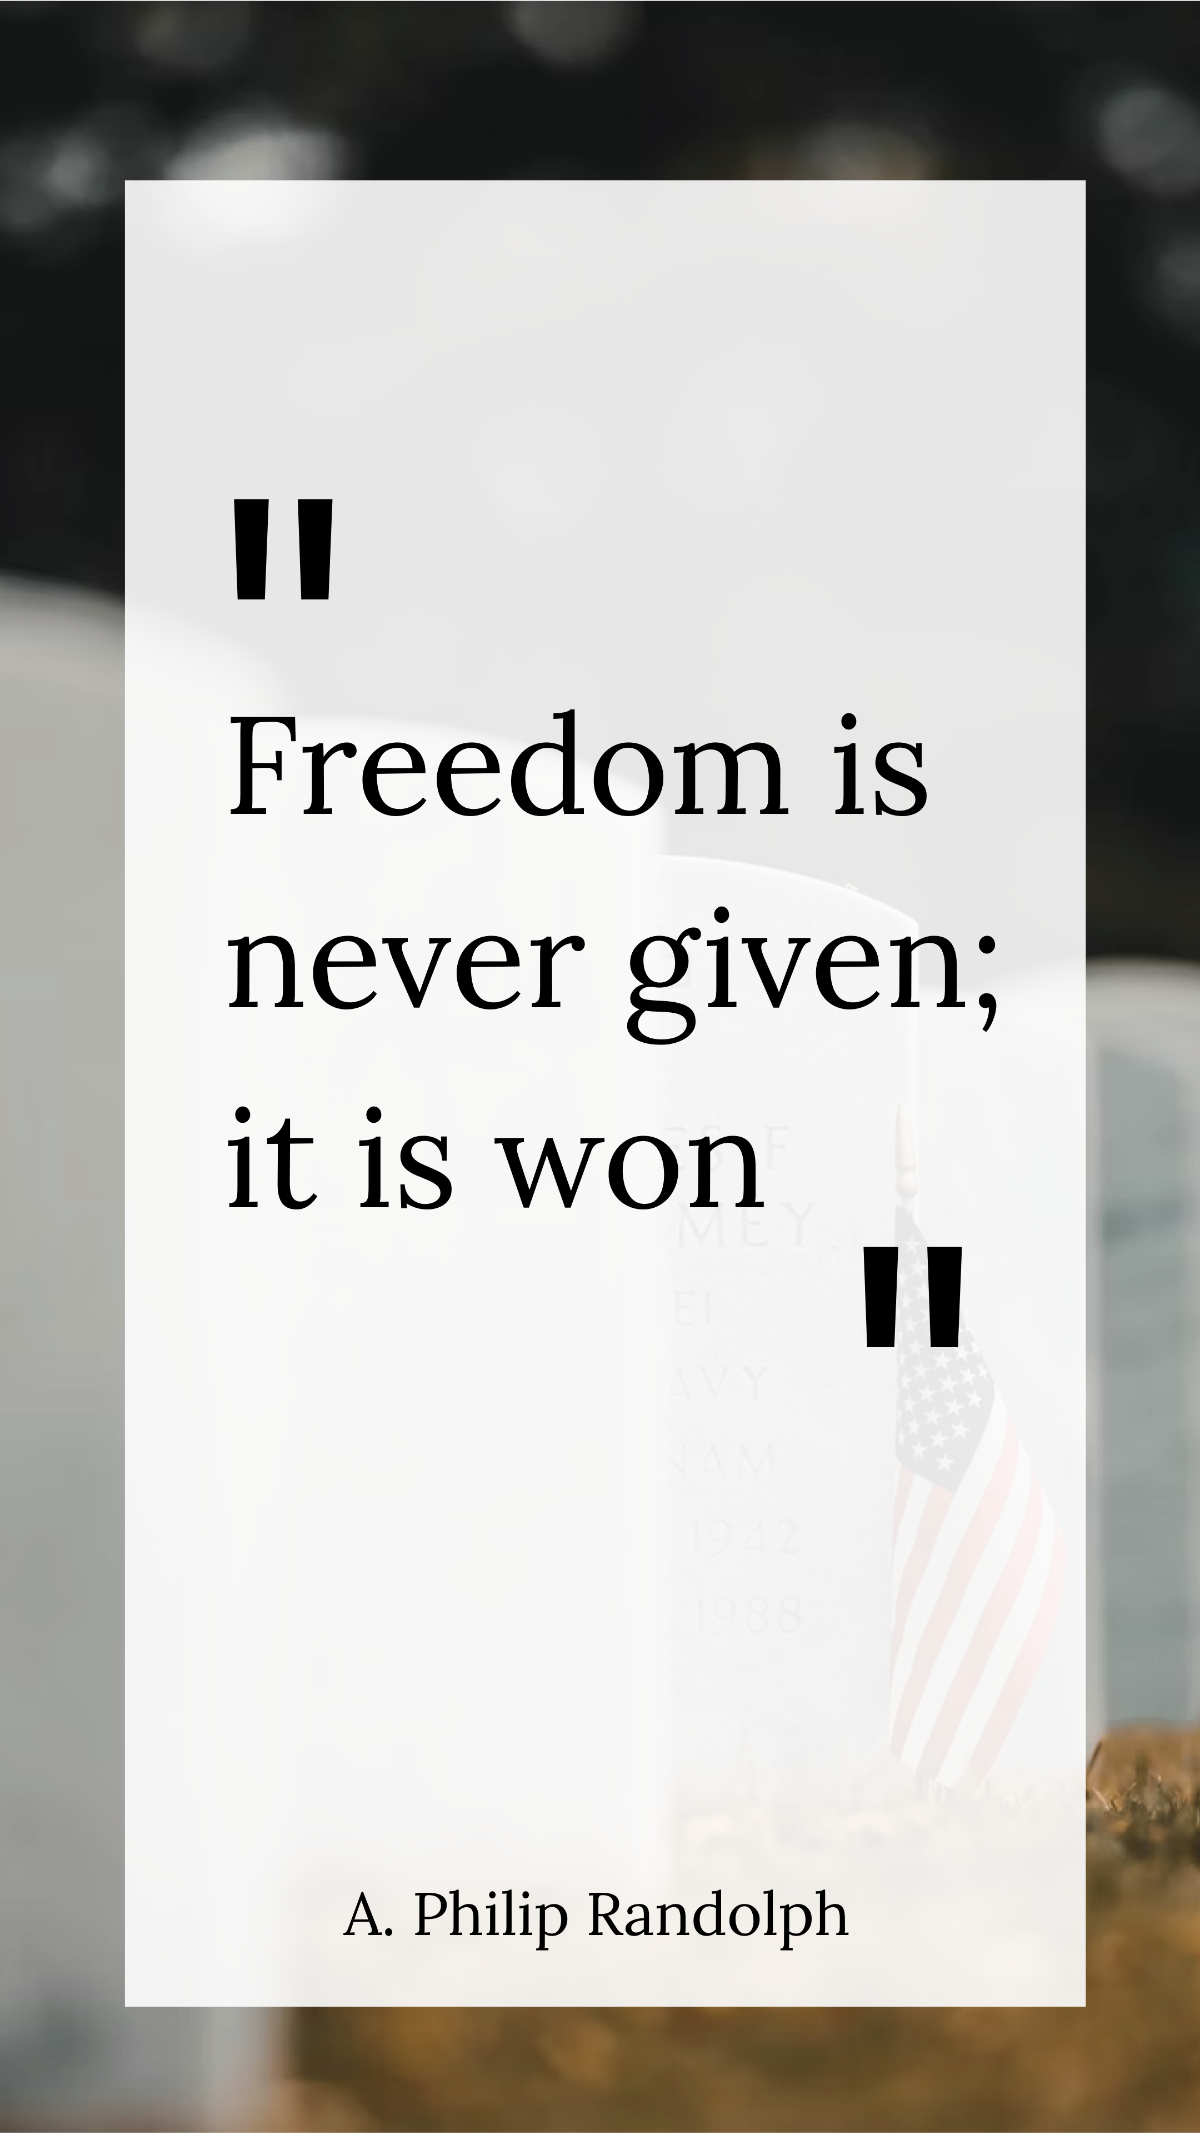 A. Philip Randolph - Freedom is never given; it is won. Template